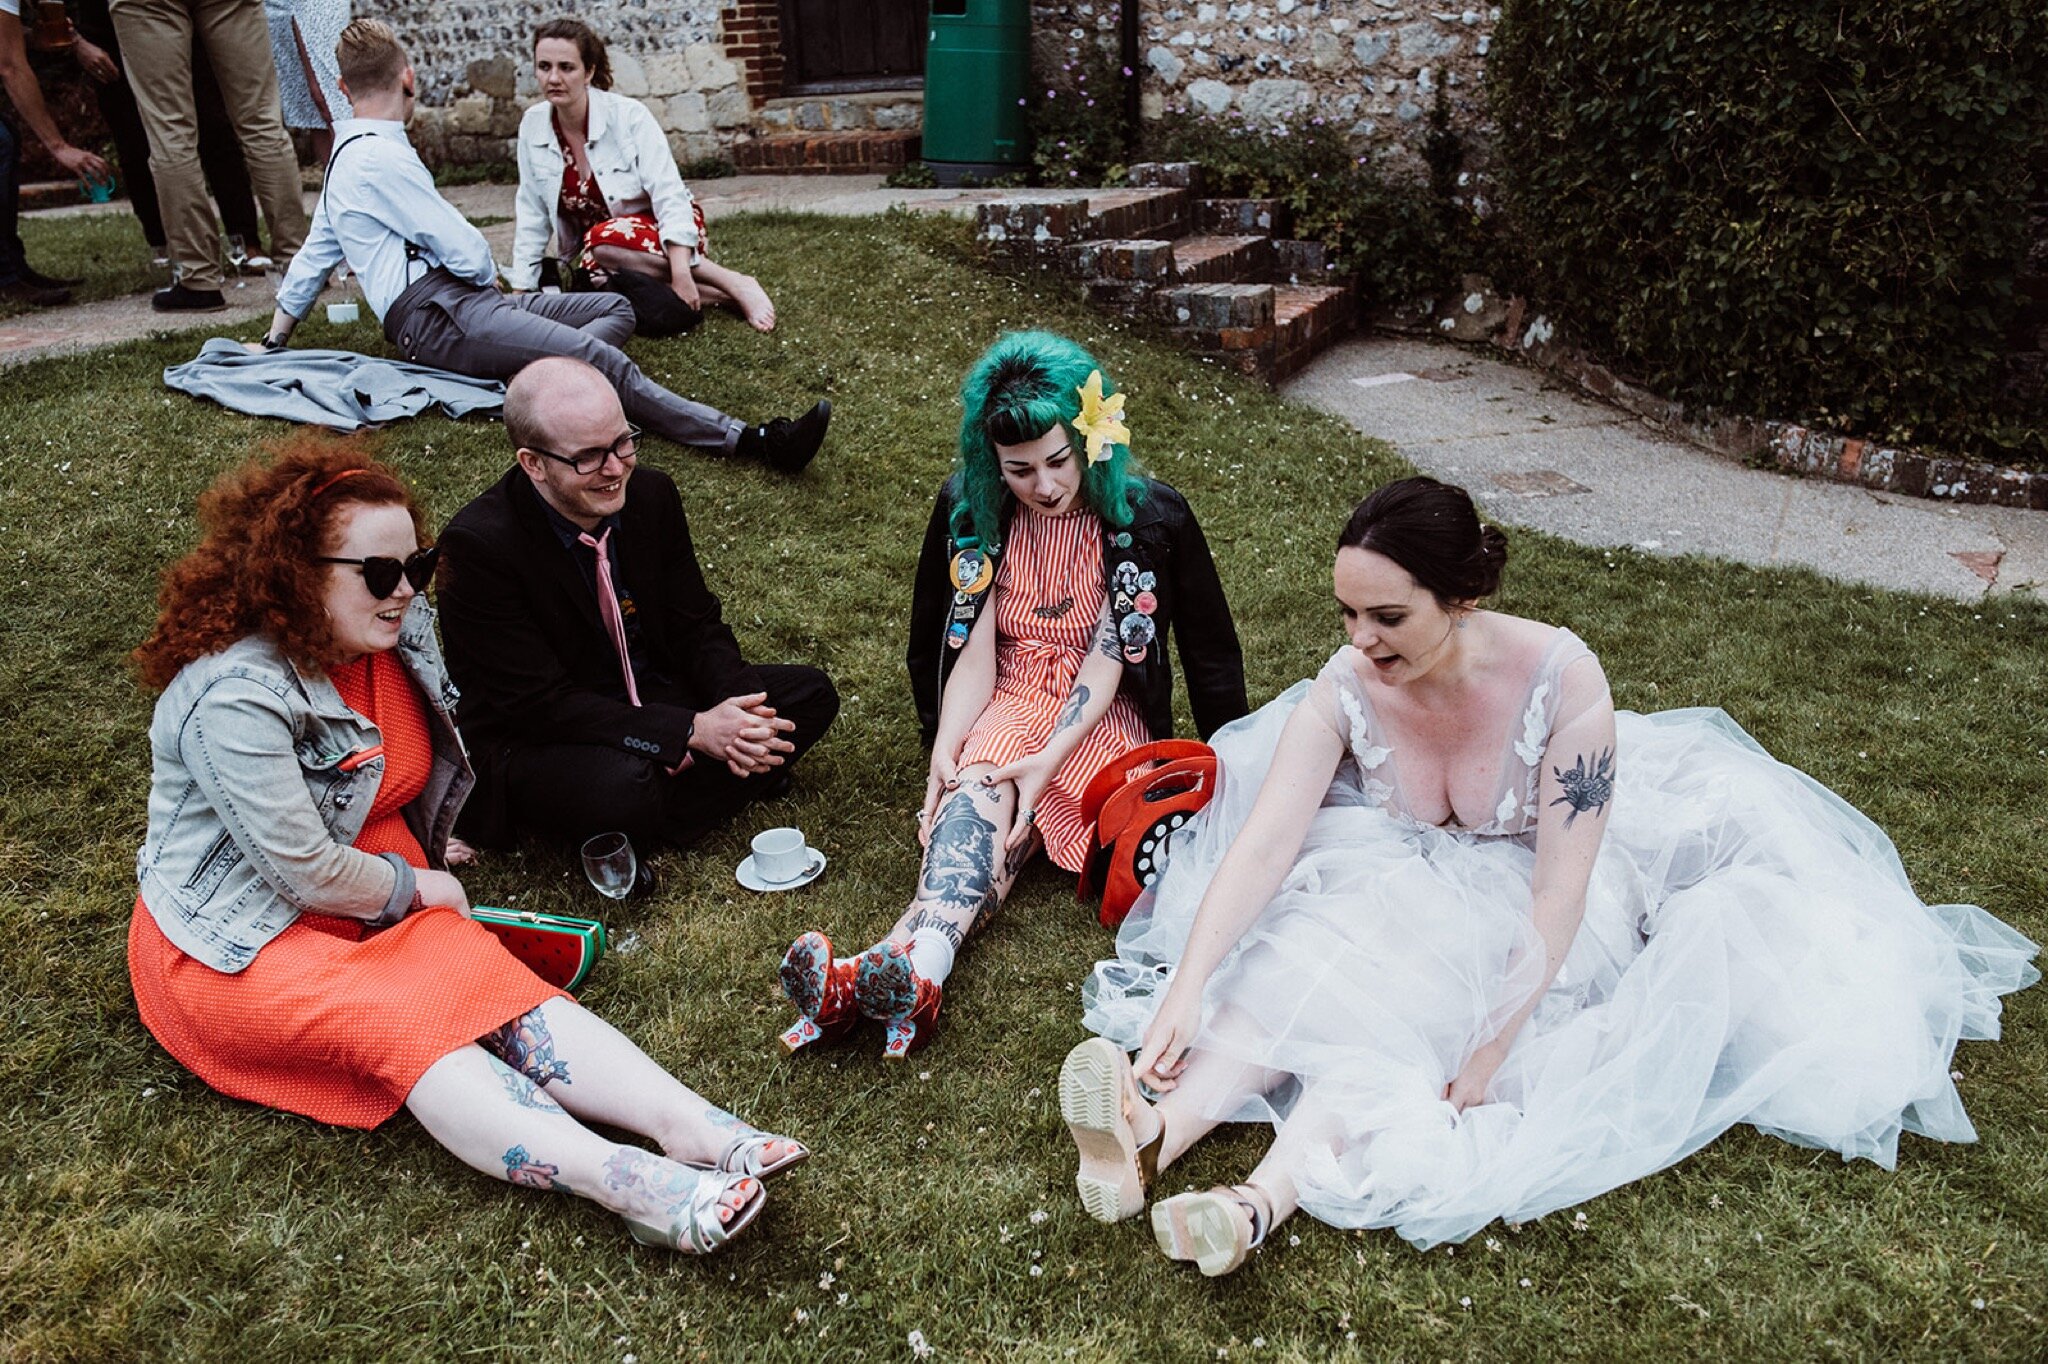 46_V+D Wedding-746_bride and guests sat on grass looking at brides shoes%0A.jpg